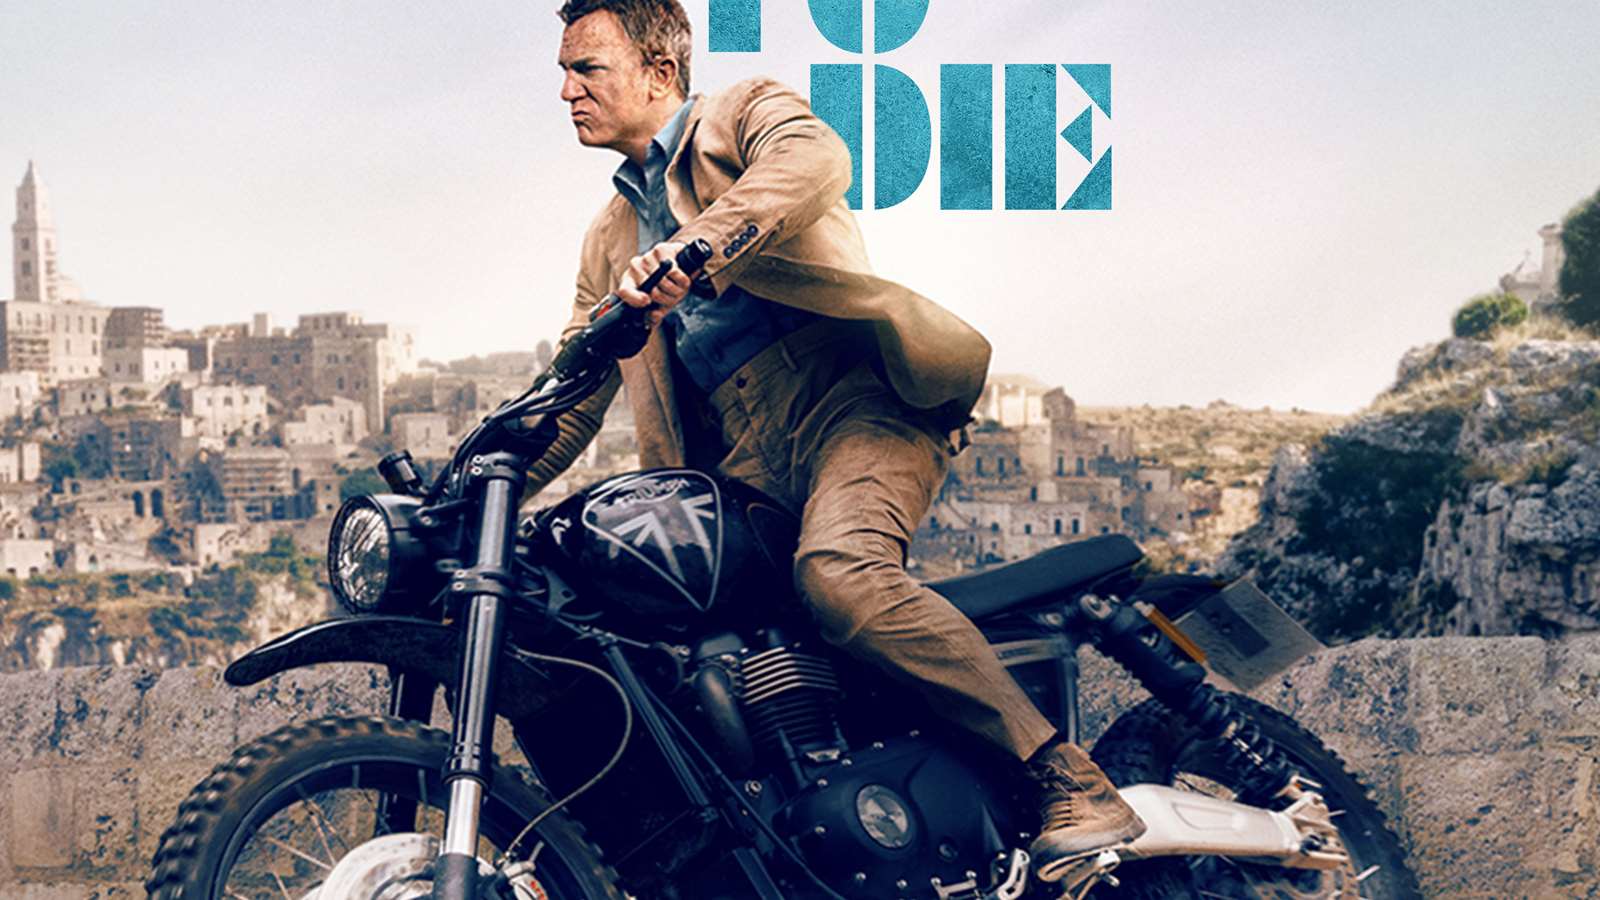 A poster/hero of James Bond movie "No Time To Die", featuring Daniel Craig